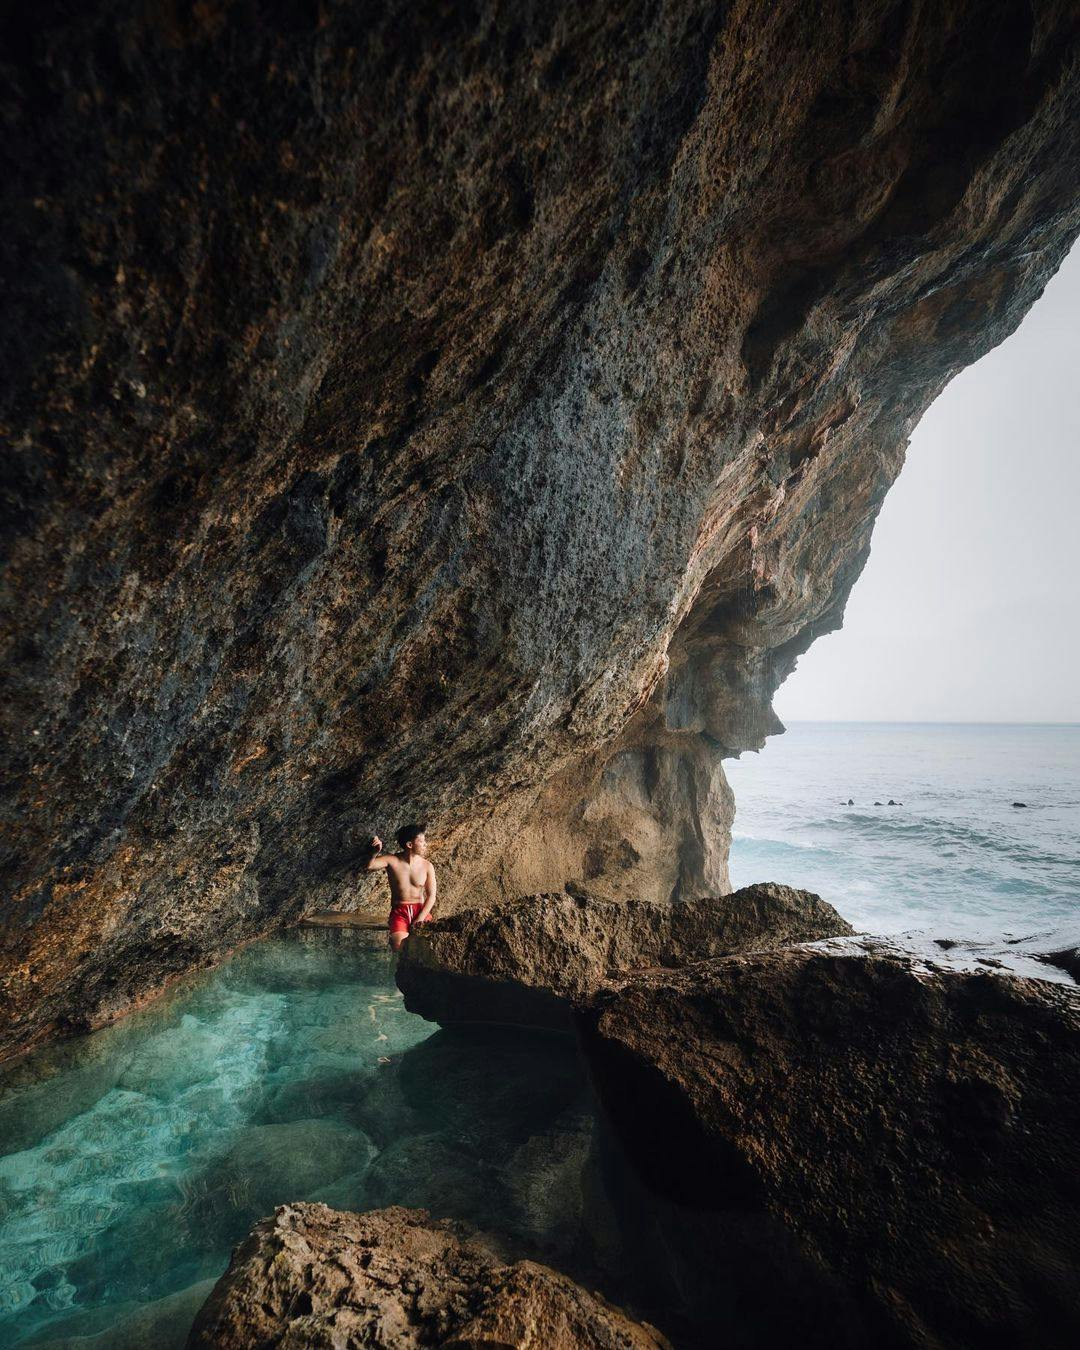 Nusa Penida is wild, dramatic and still very off-grid if you go at the right times.